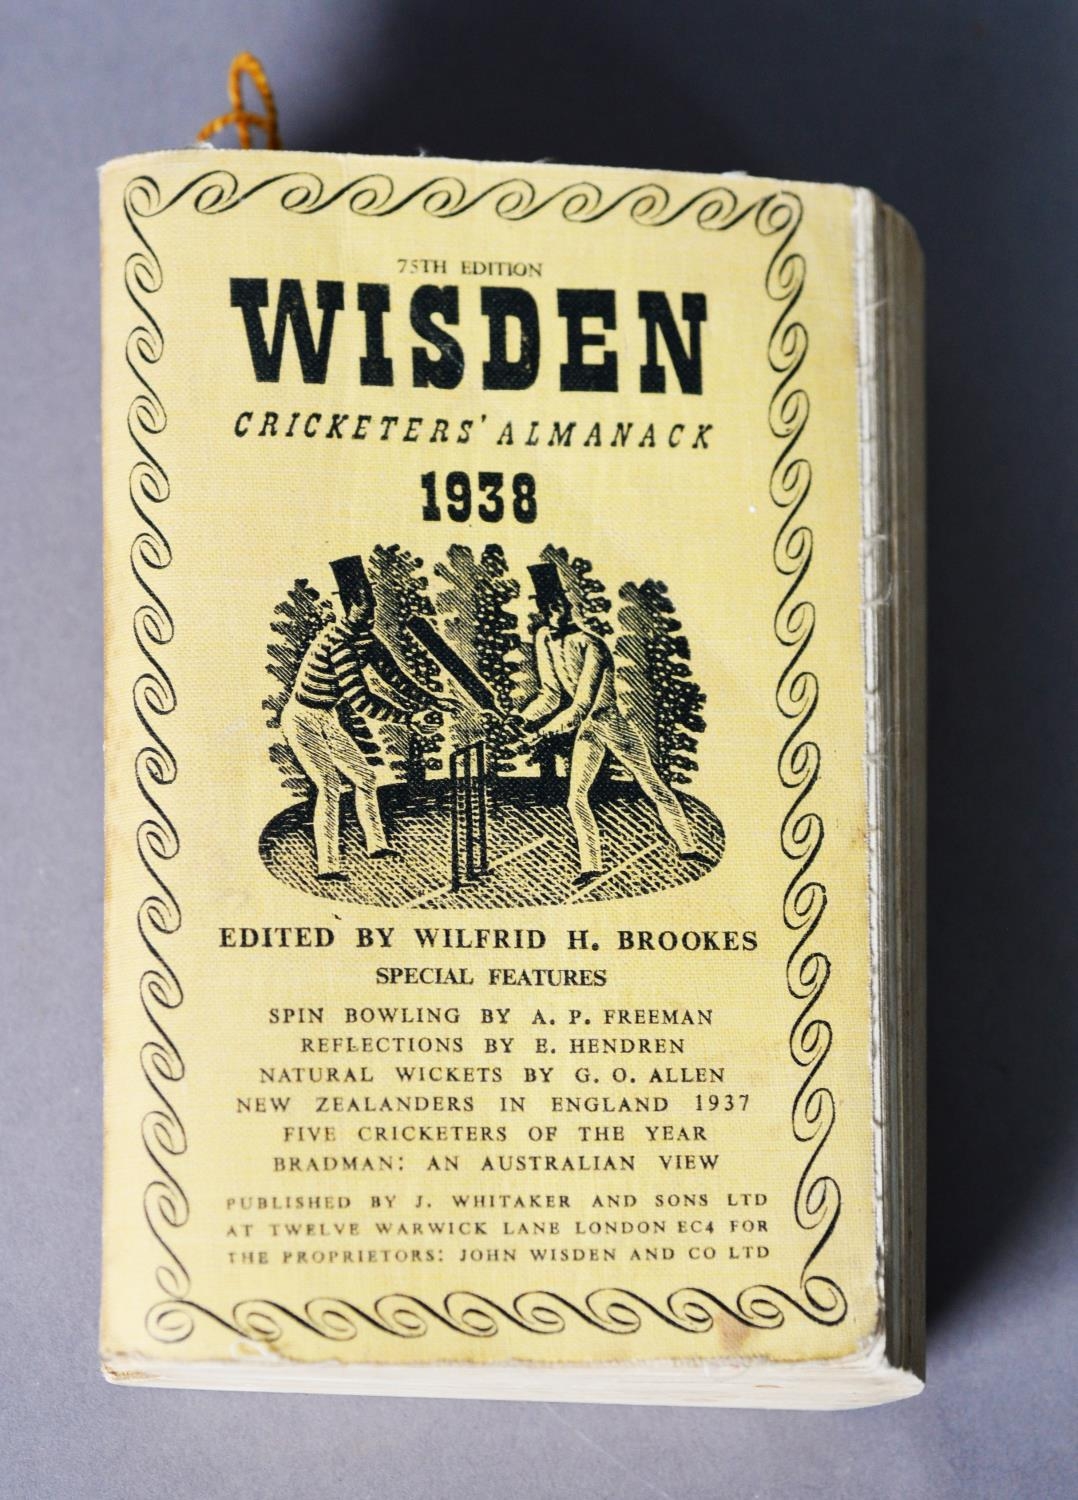 From the collection of the late, eminent music critic, Michael Kennedy. CRICKET Wisden Cricketers’